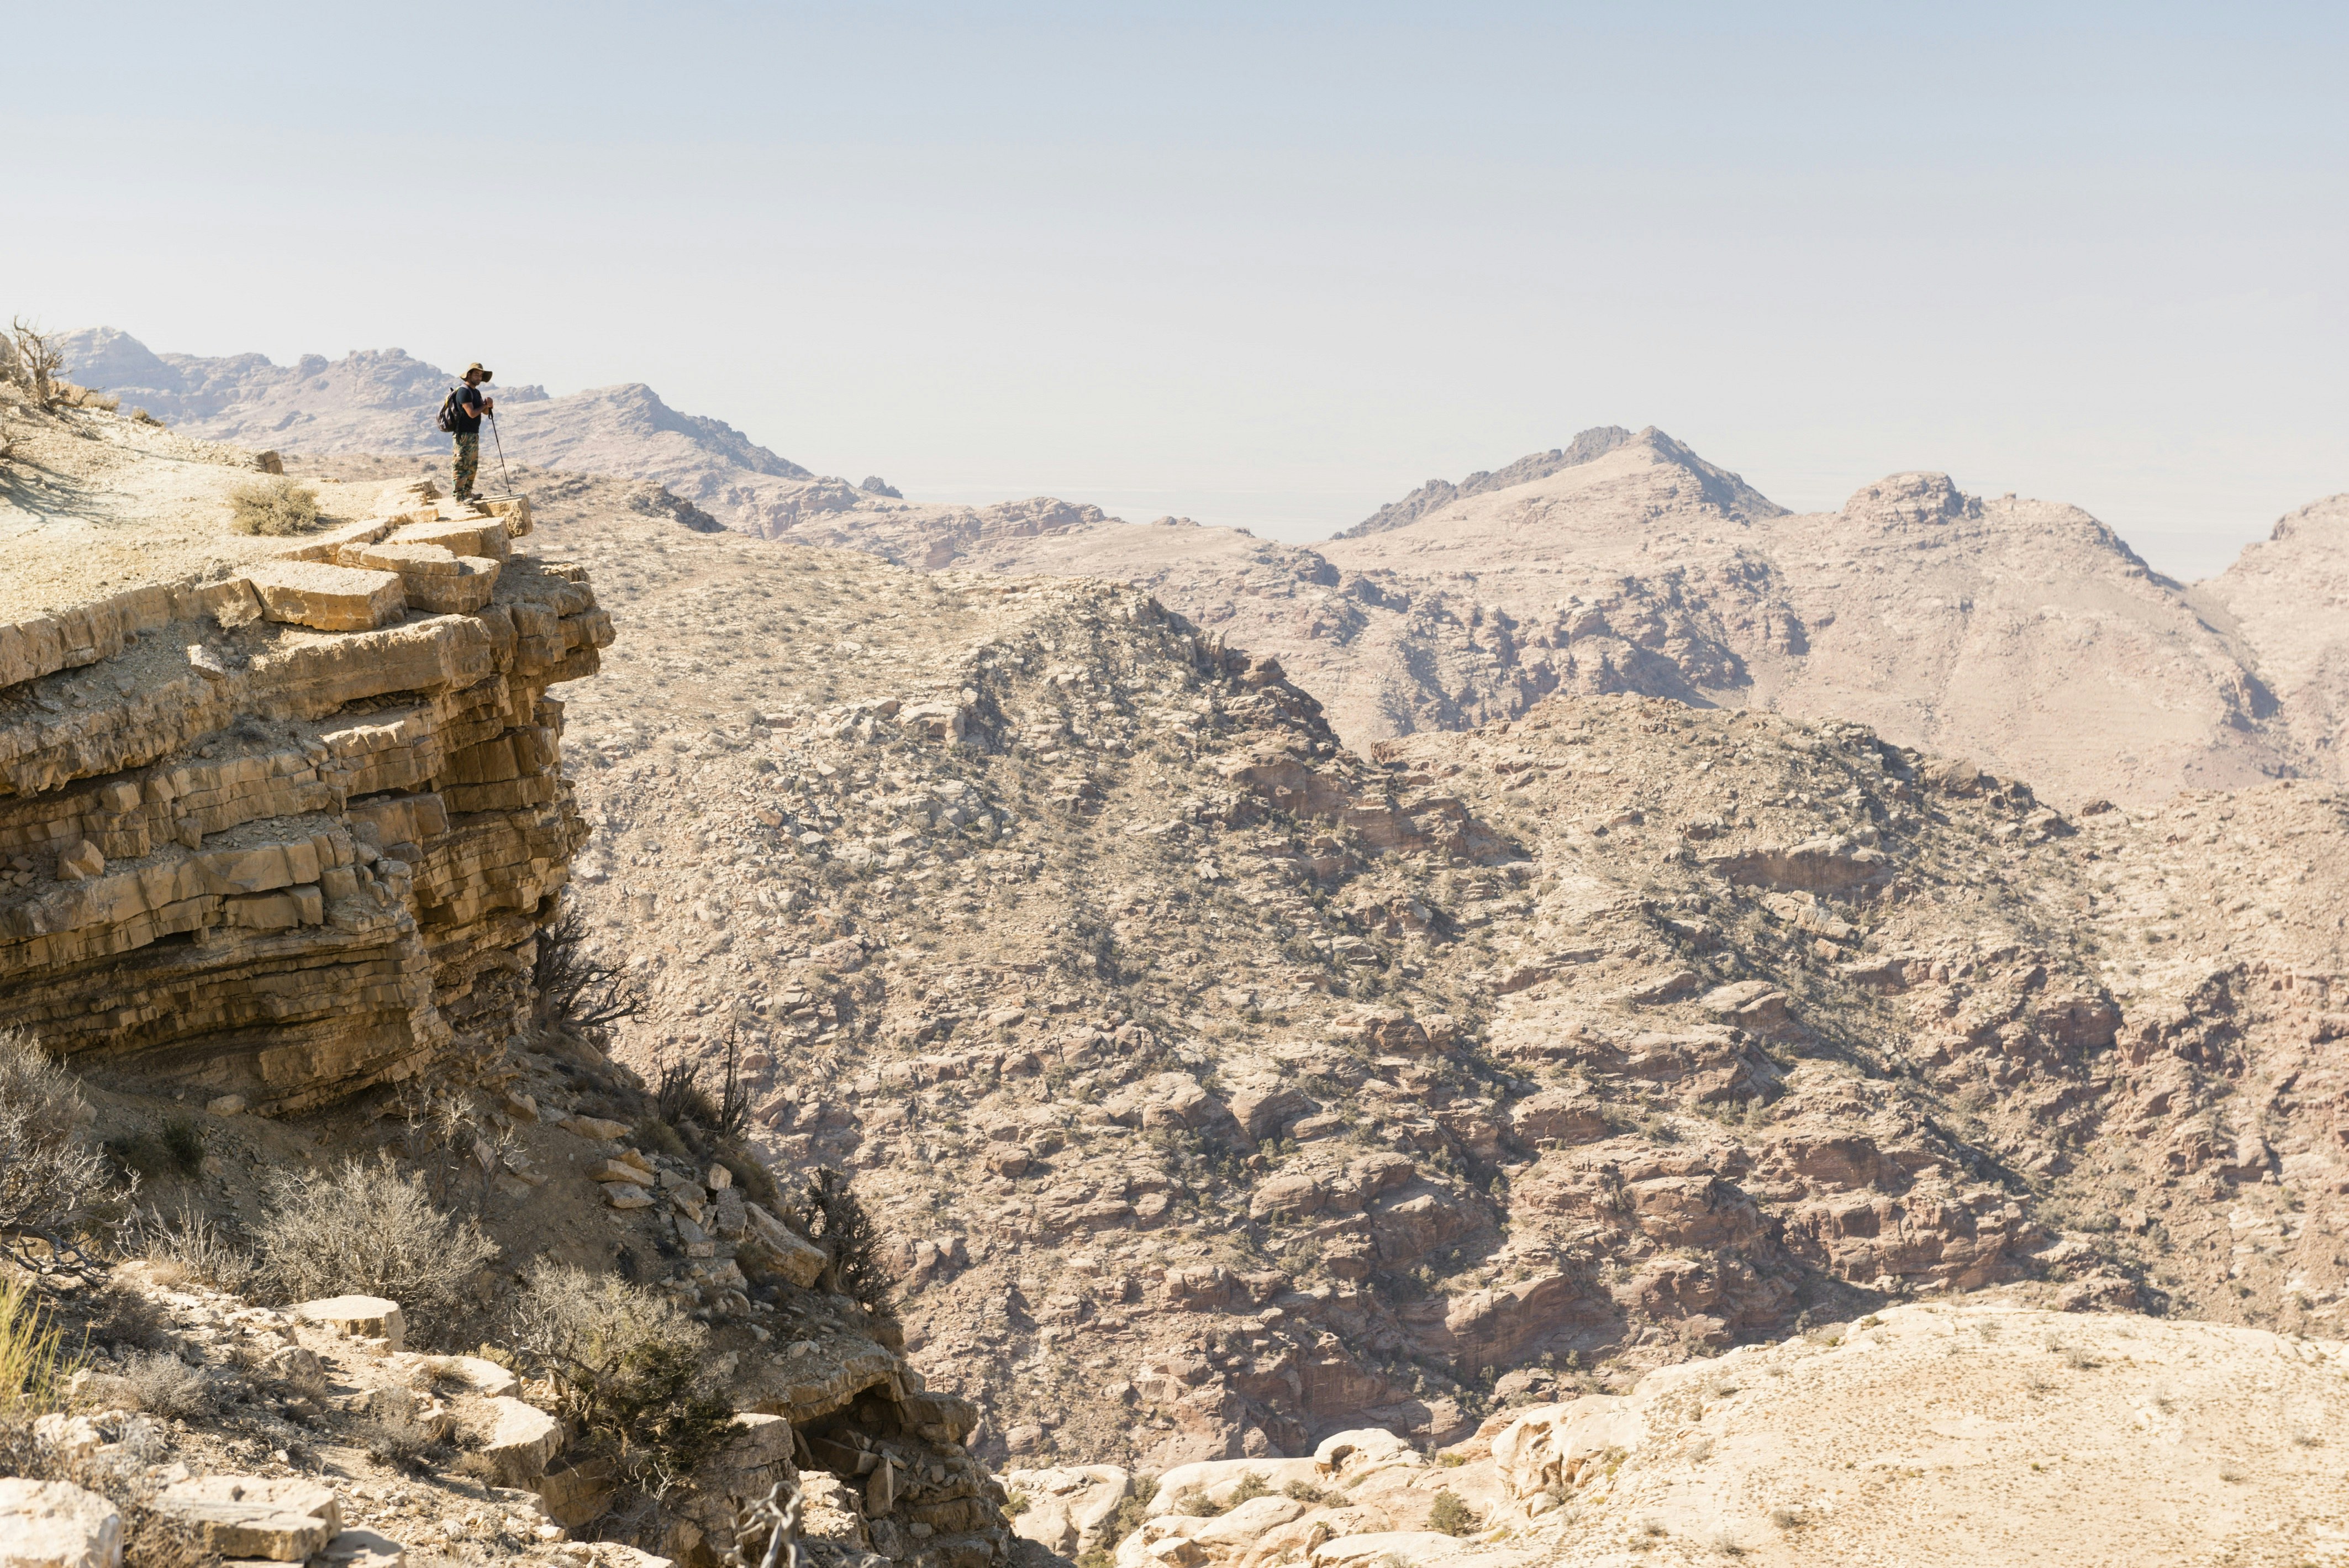 A trekker stands on the edge of a cliff and overlooks a dramatic rocky canyon.